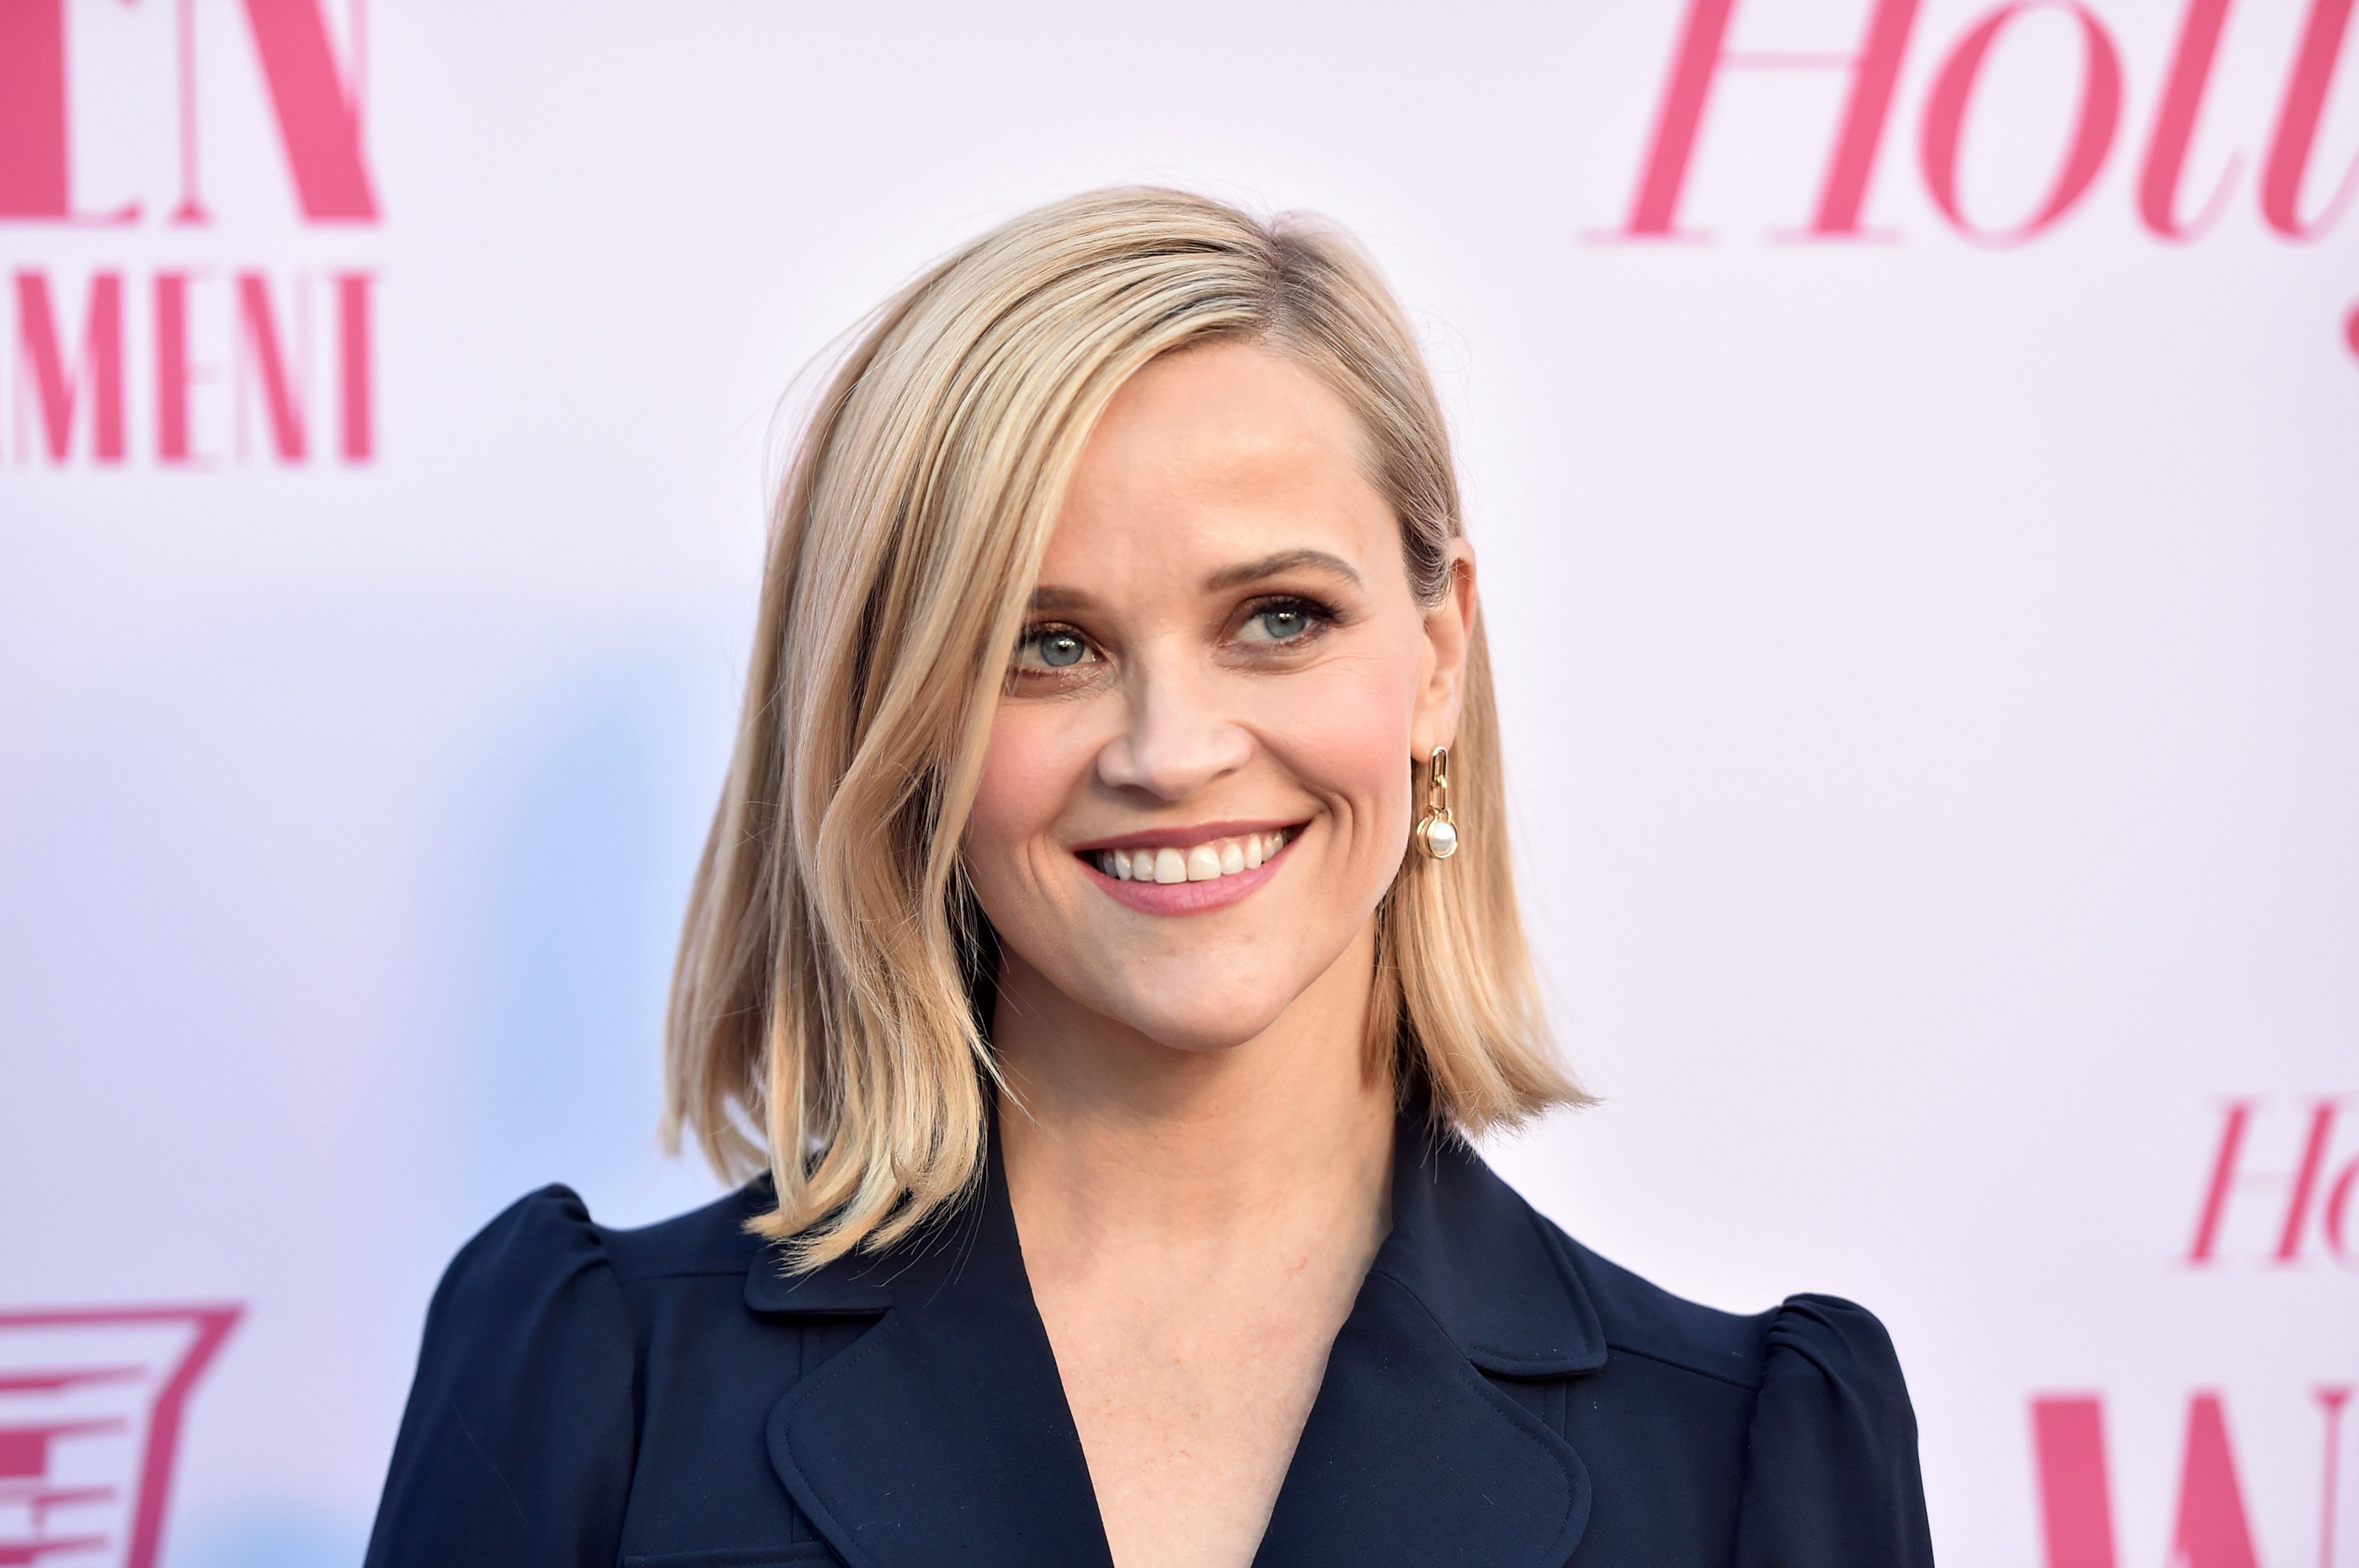 Reese Witherspoon at The Hollywood Reporter's Power 100 Women in Entertainment event